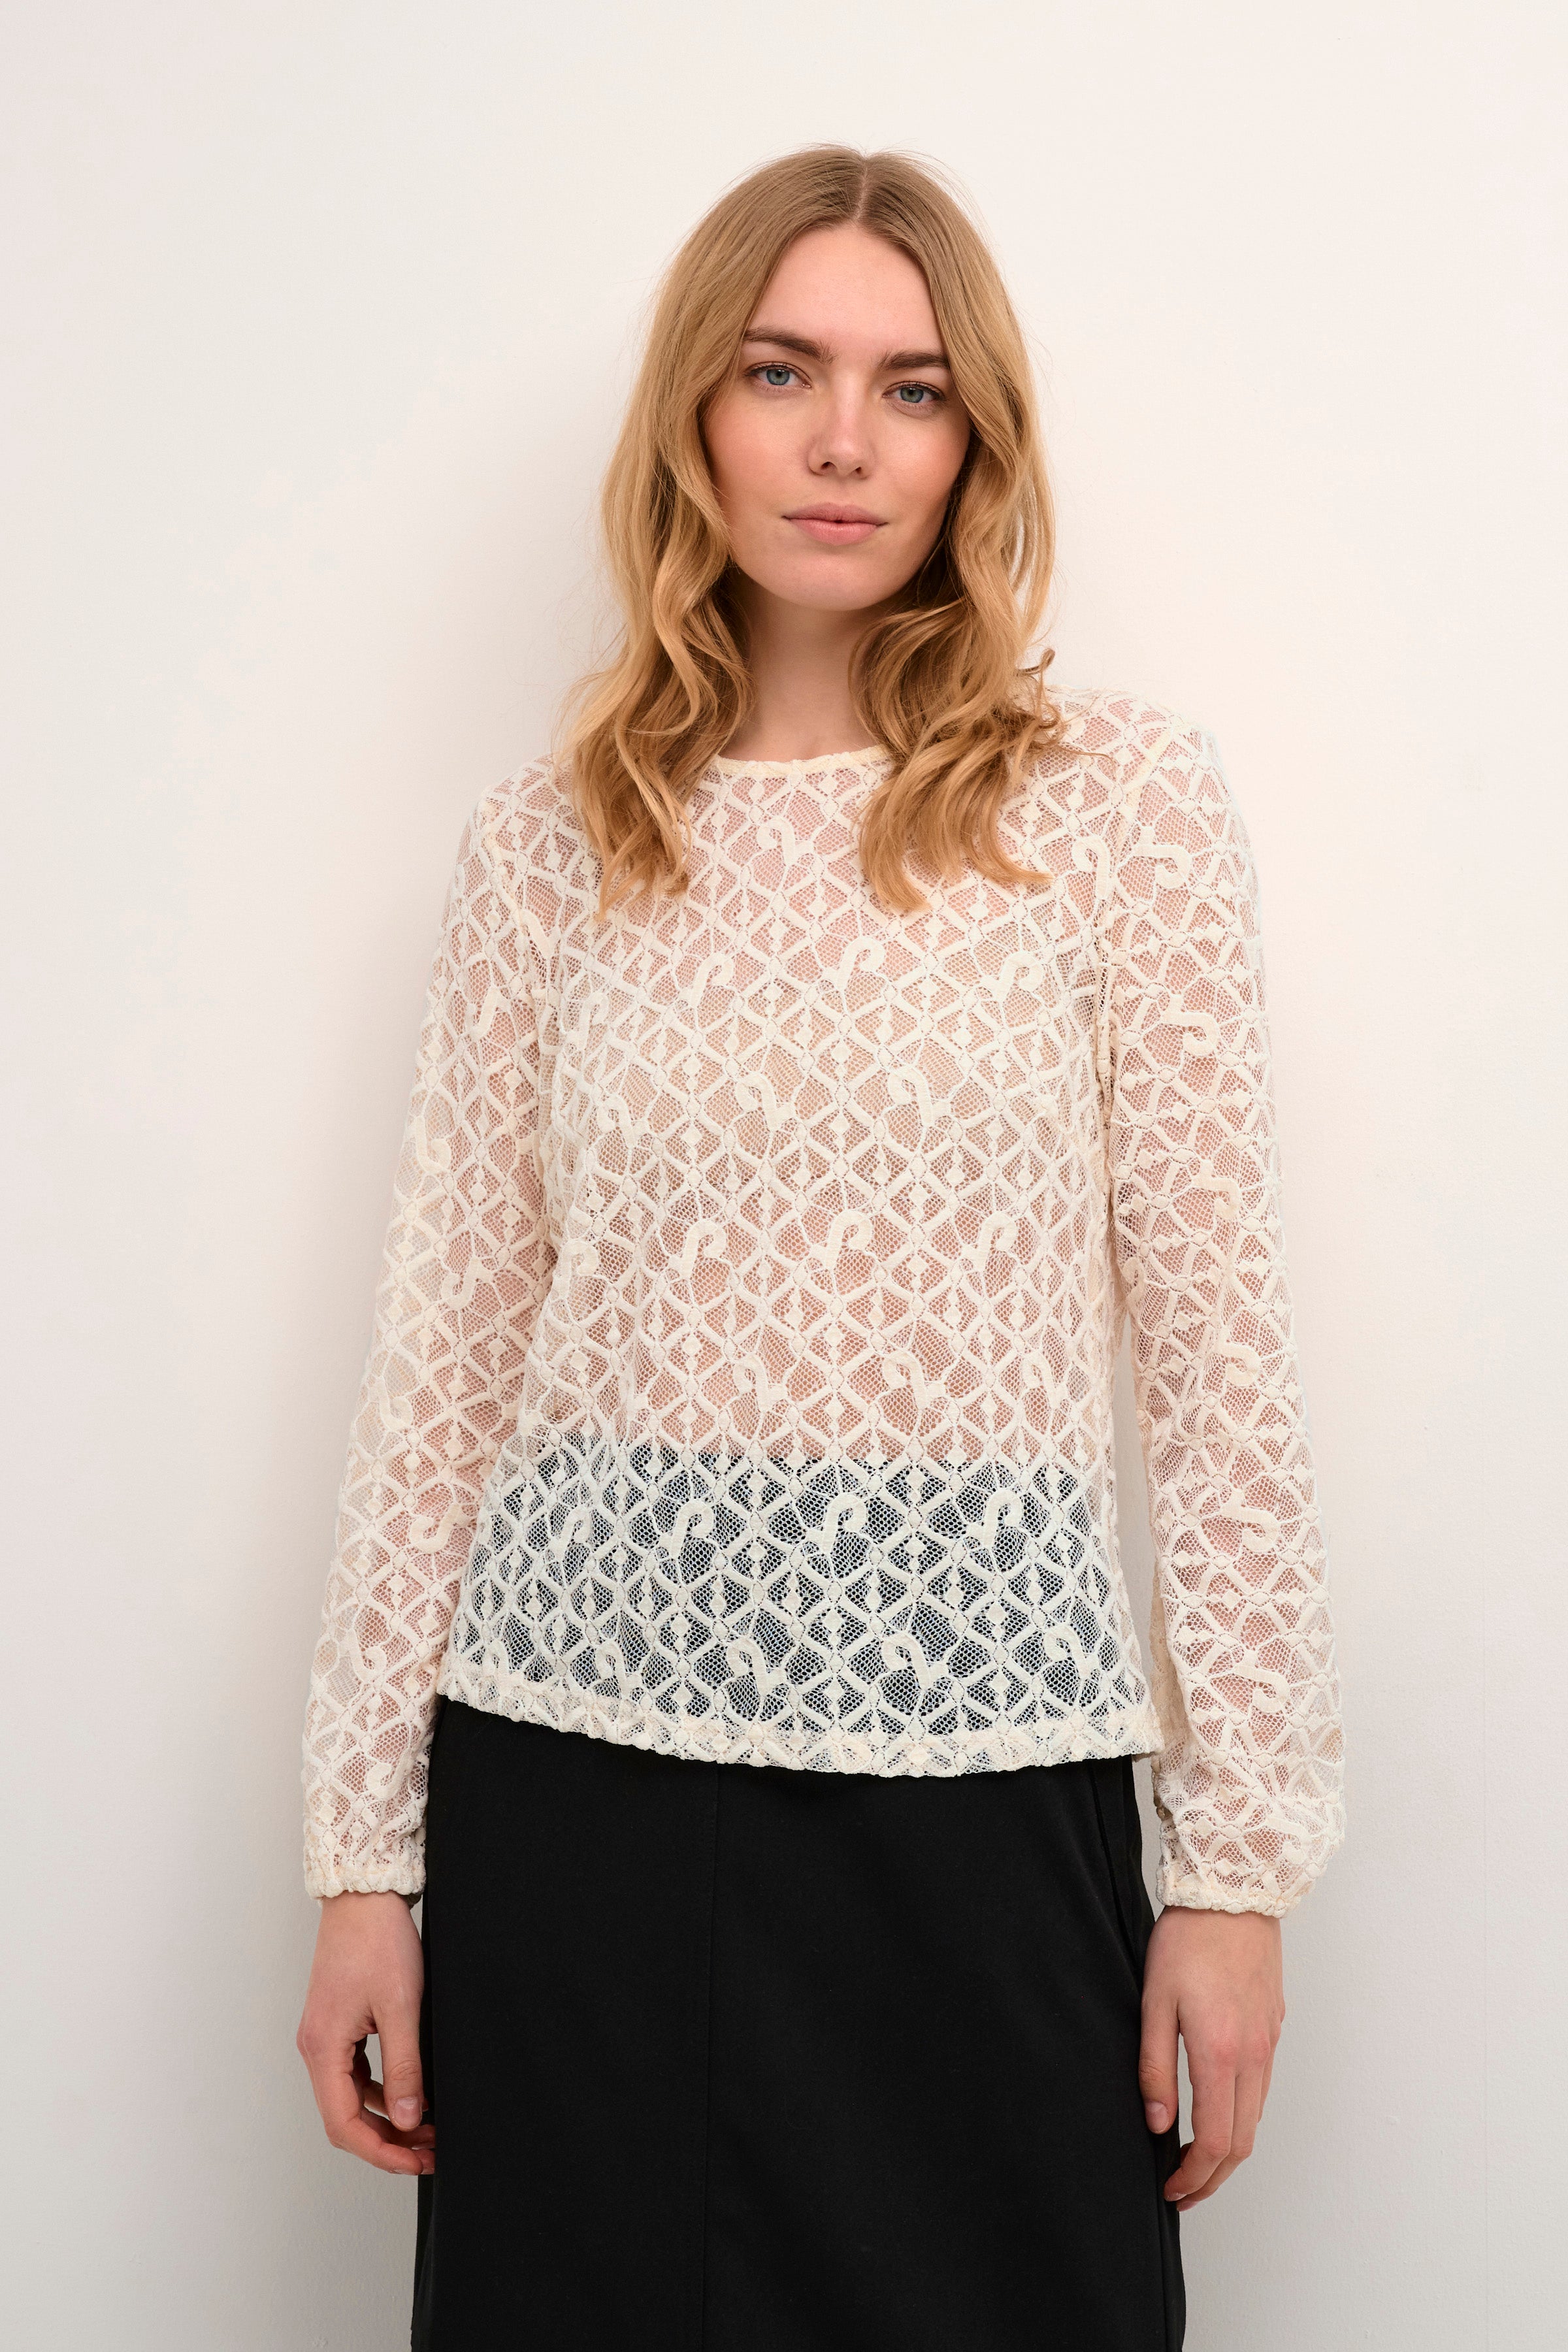 Feel beautiful and timeless in our Cream Gila Lace Blouse. The delicate lace adds an elegant touch to any ensemble. 